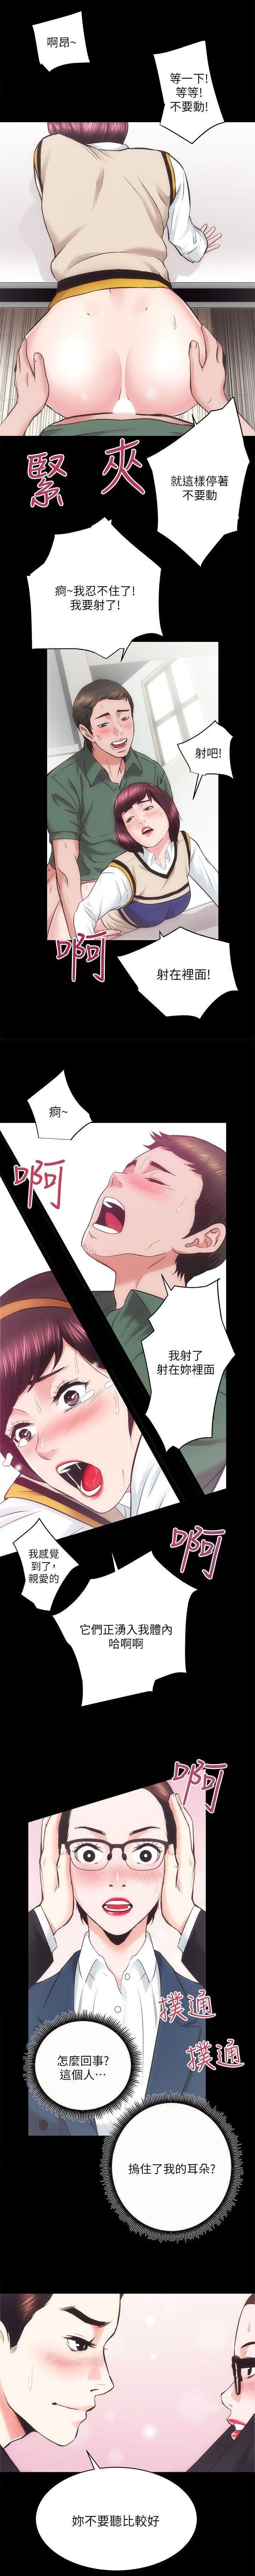 Big Black Cock 性溢房屋 Chapter 17-20 Point Of View - Page 7